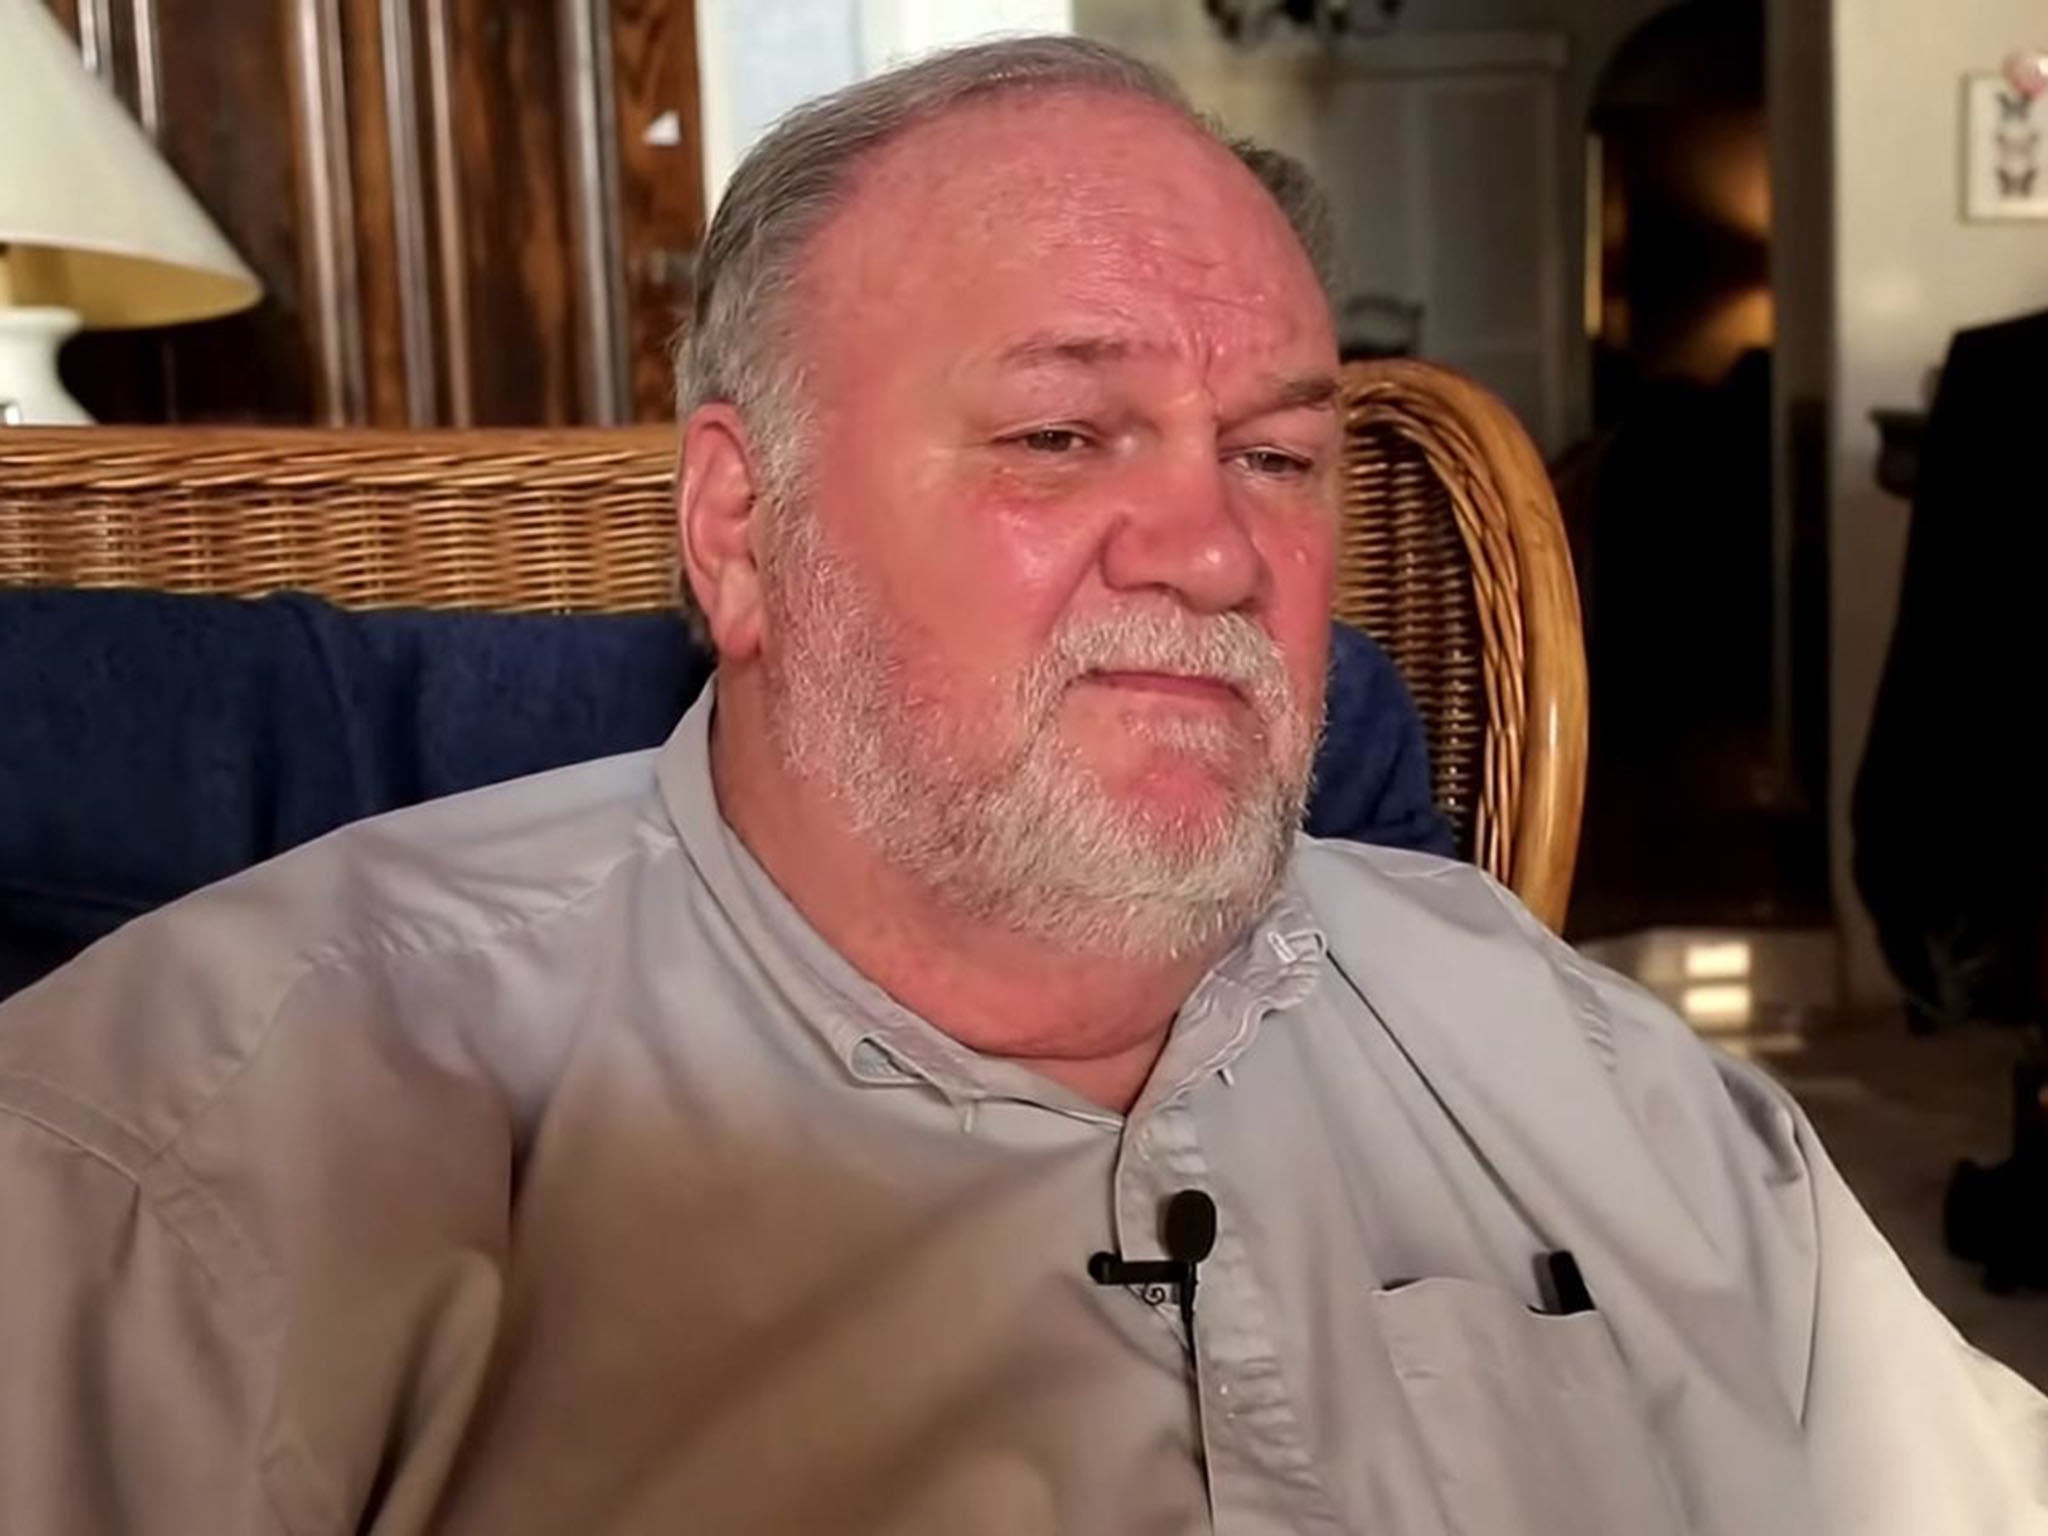 Thomas Markle suffered a stroke earlier this week